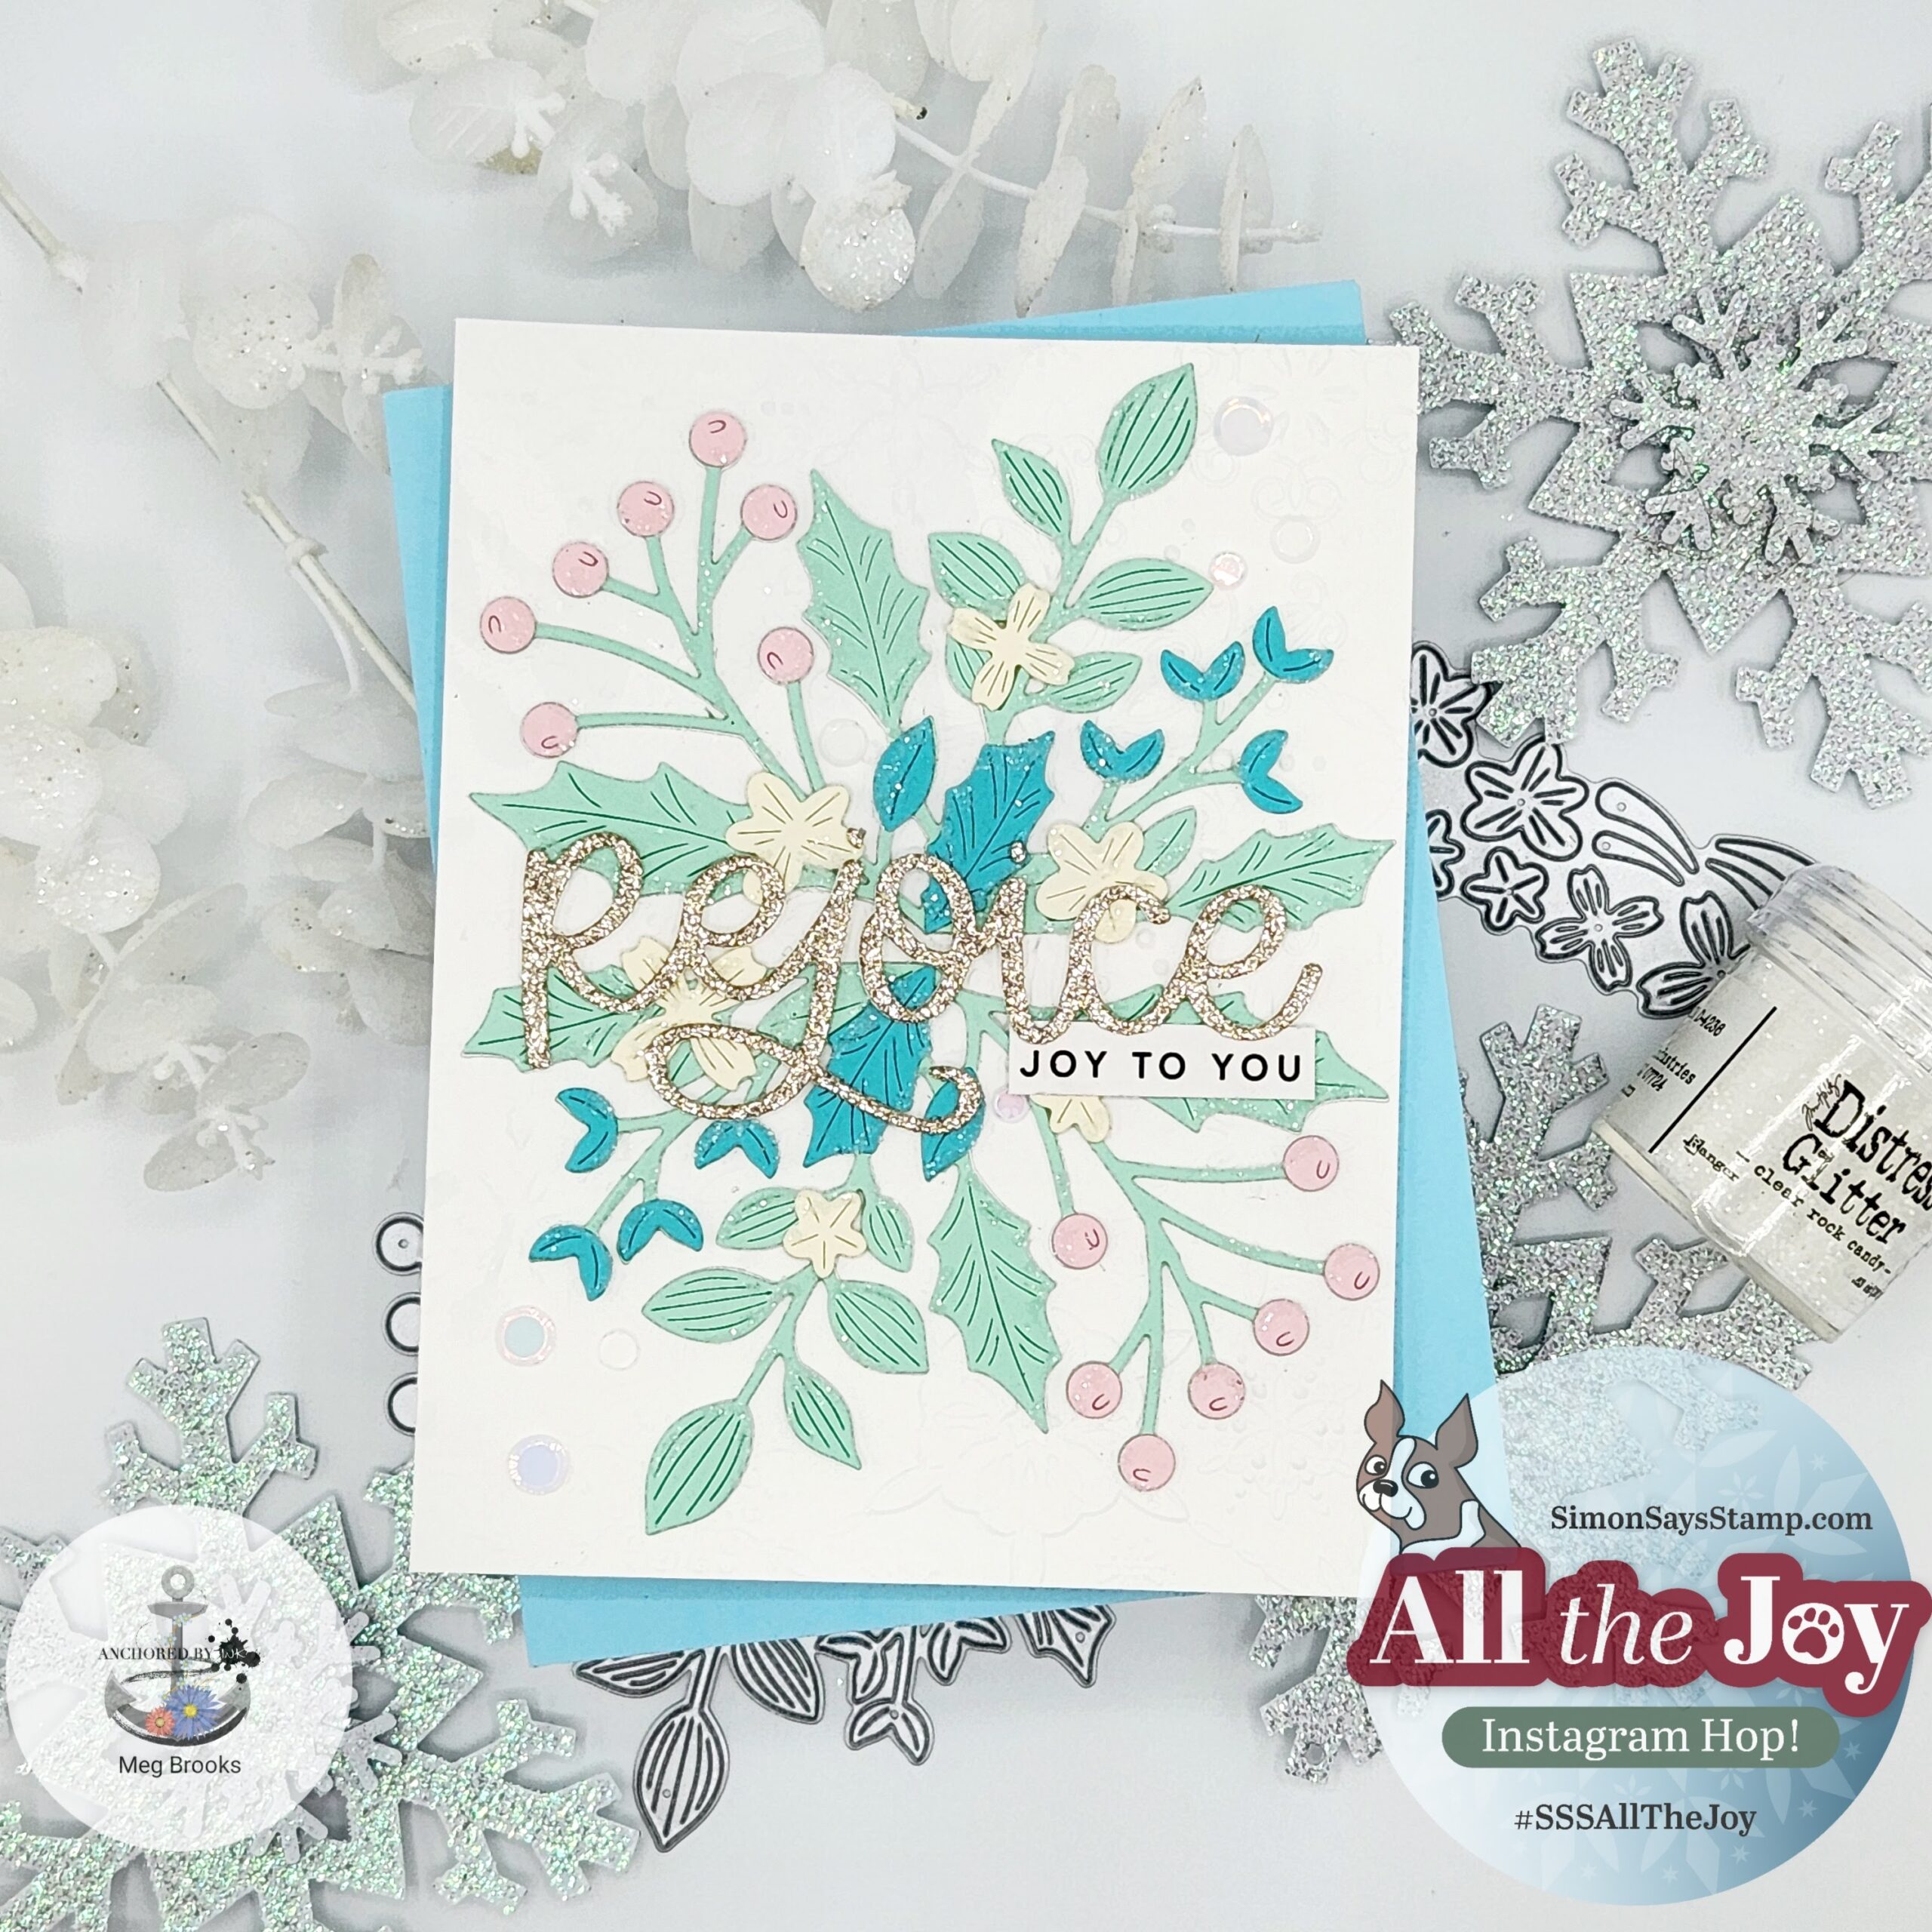 Rejoice In Pastels: Simon Says Stamp All The Joy IG Hop